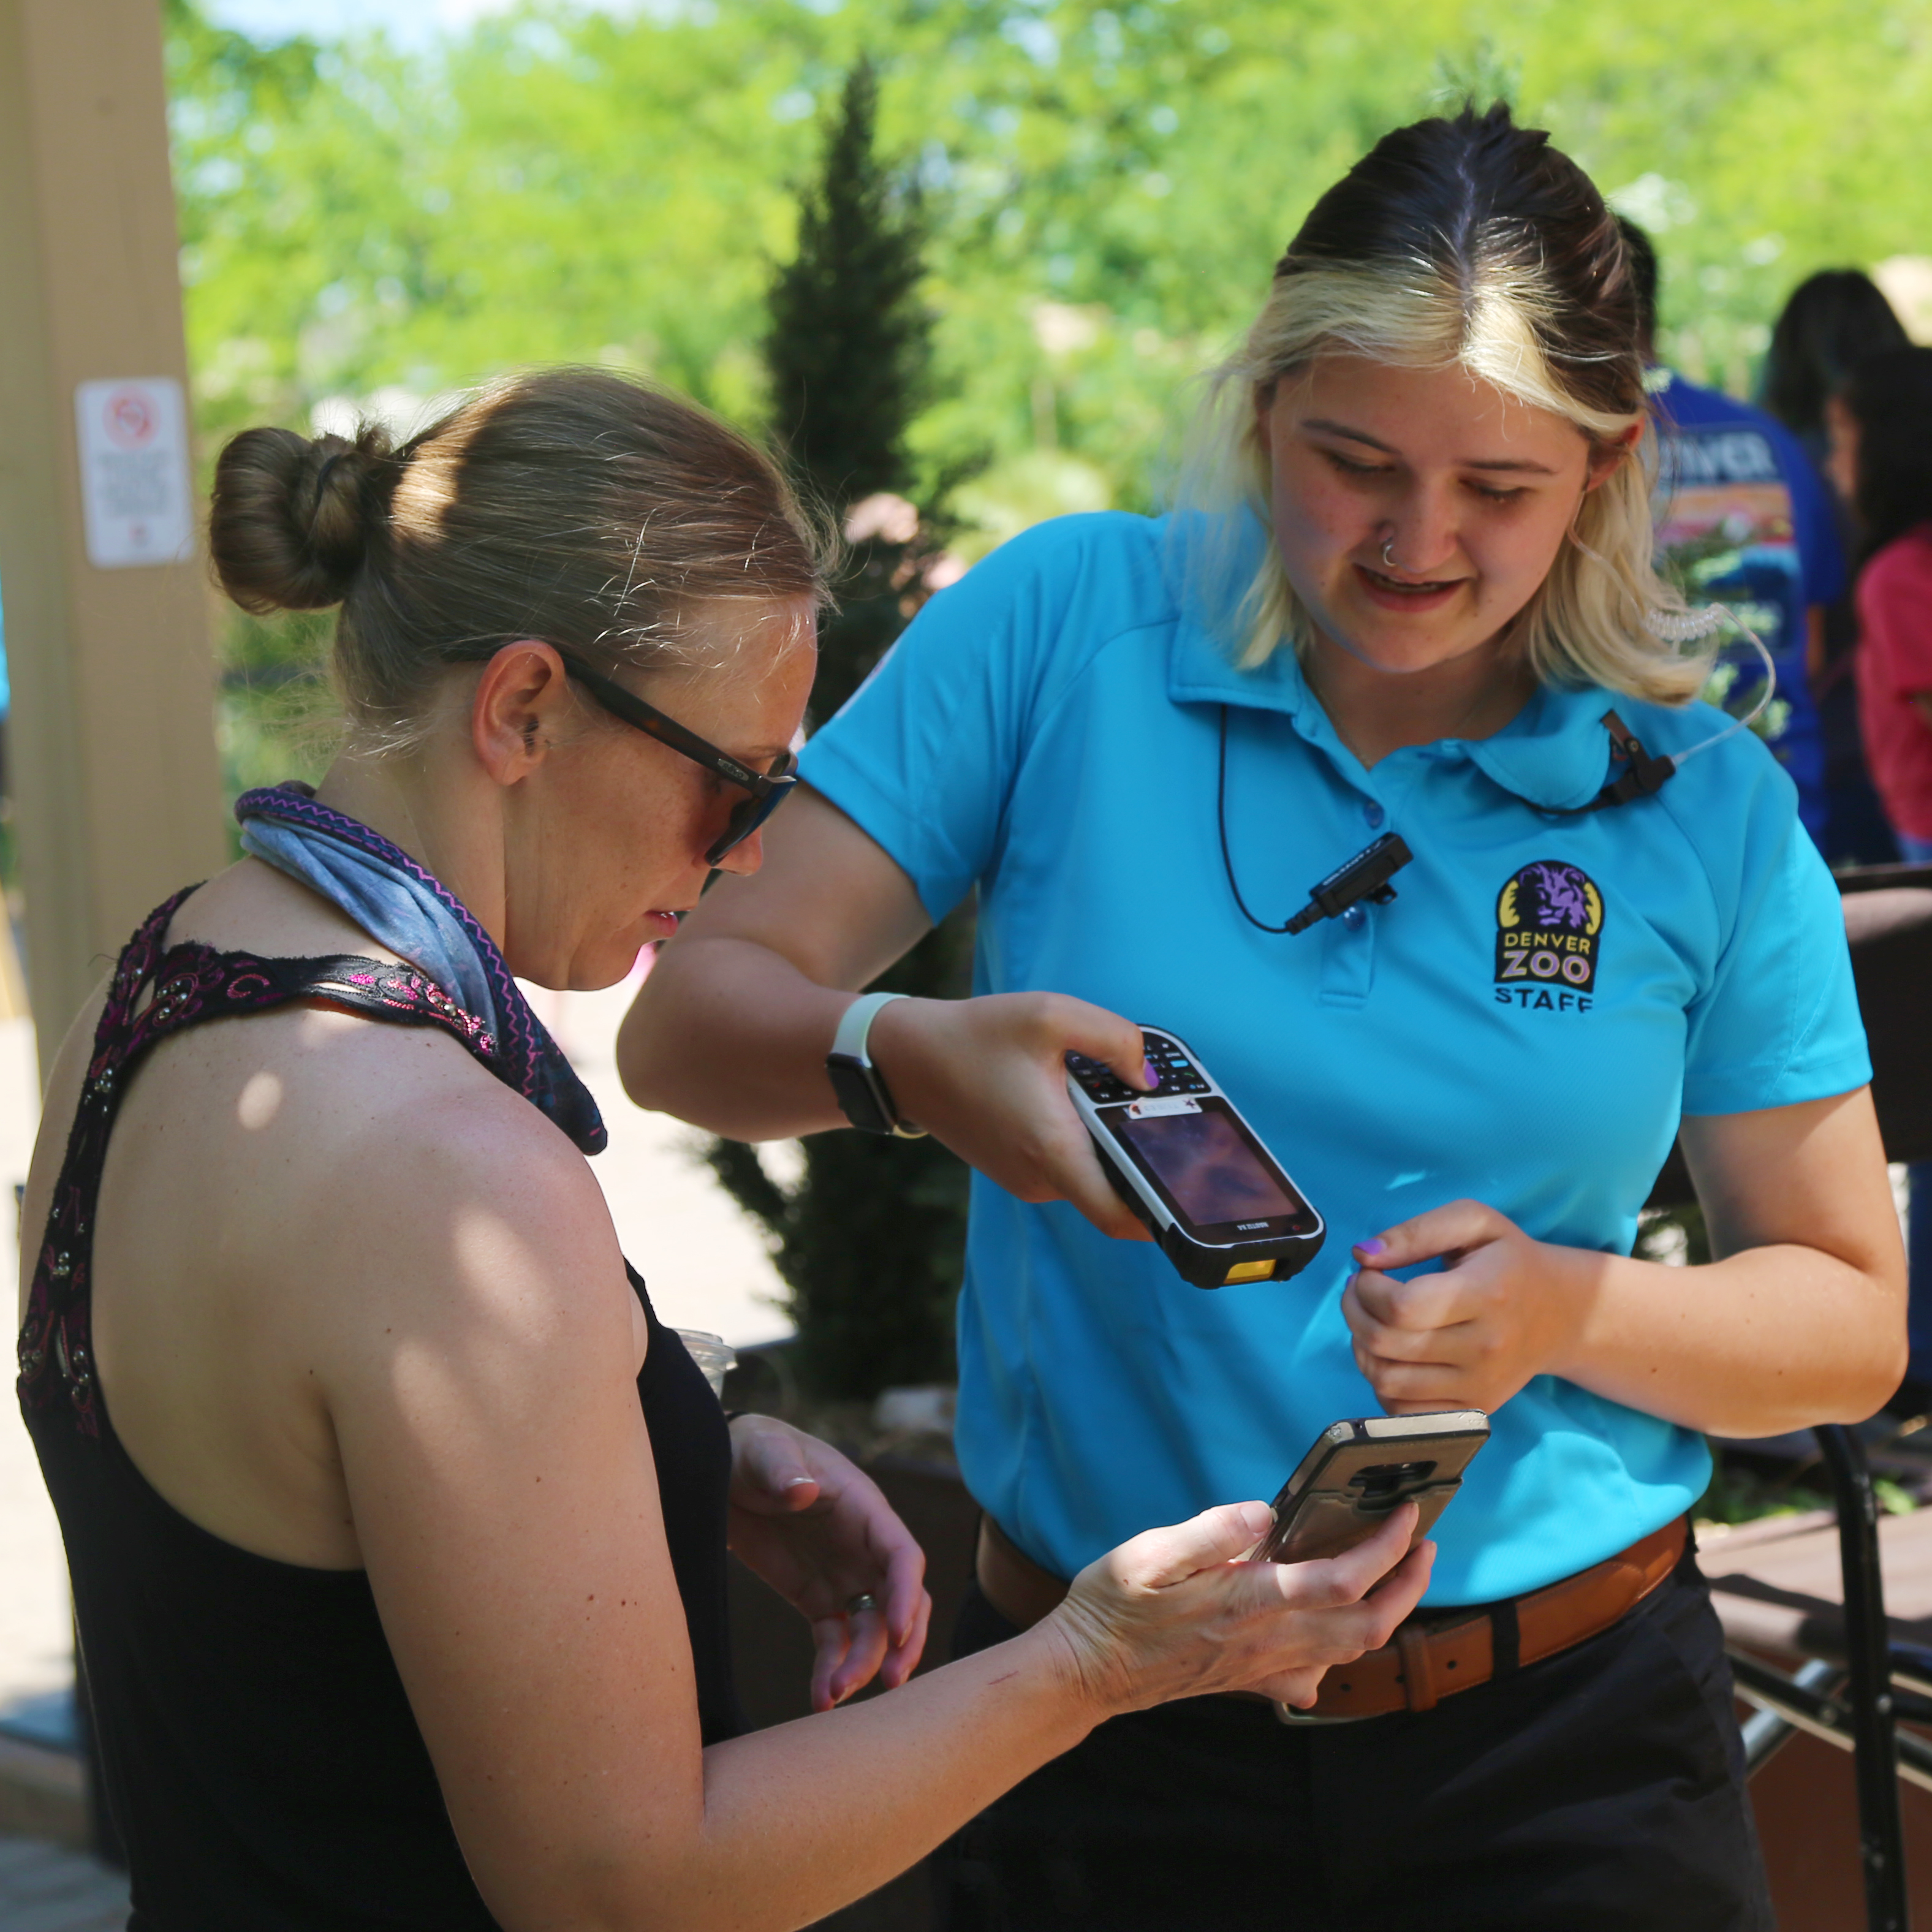 Denver Zoo employee scanning mobile ticket for guest admission. Thumbnail.